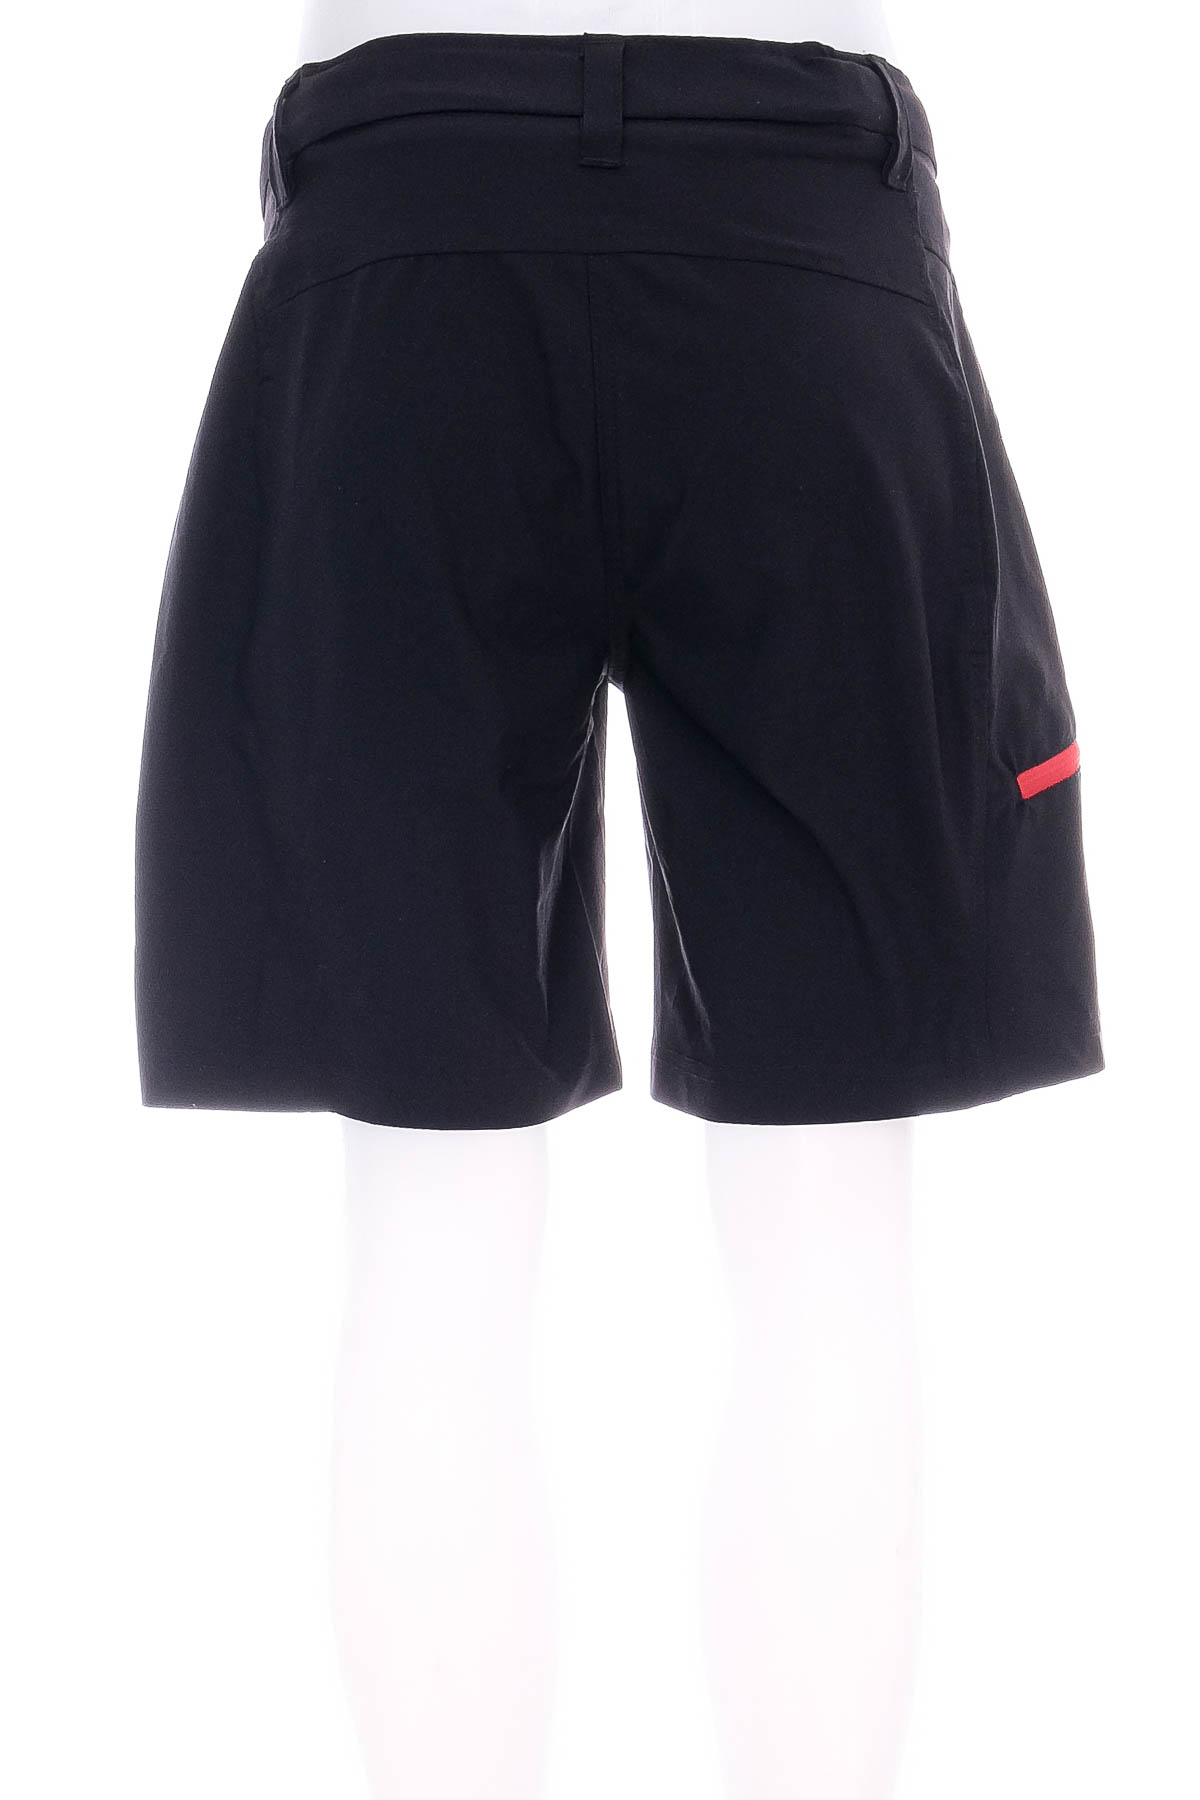 Female shorts for cycling - Crane - 1